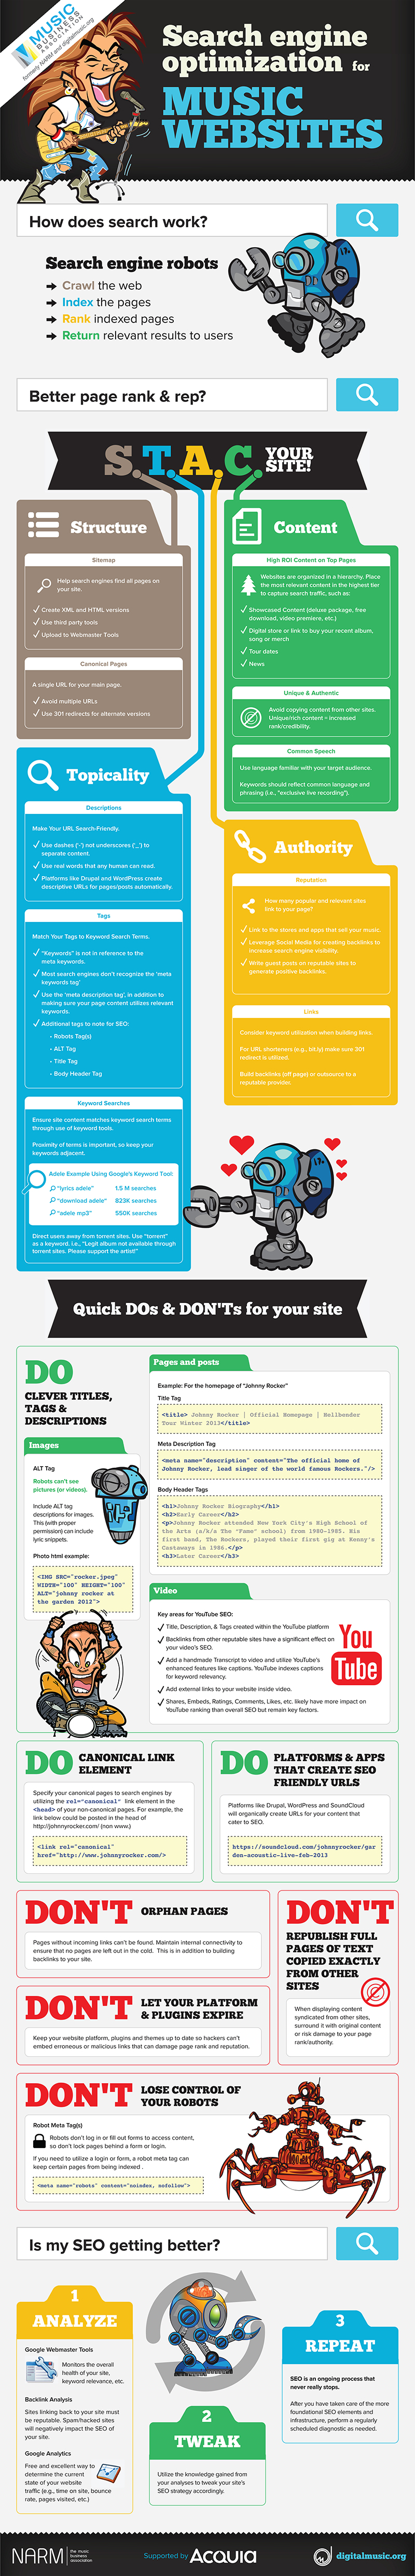 SEOInfographic